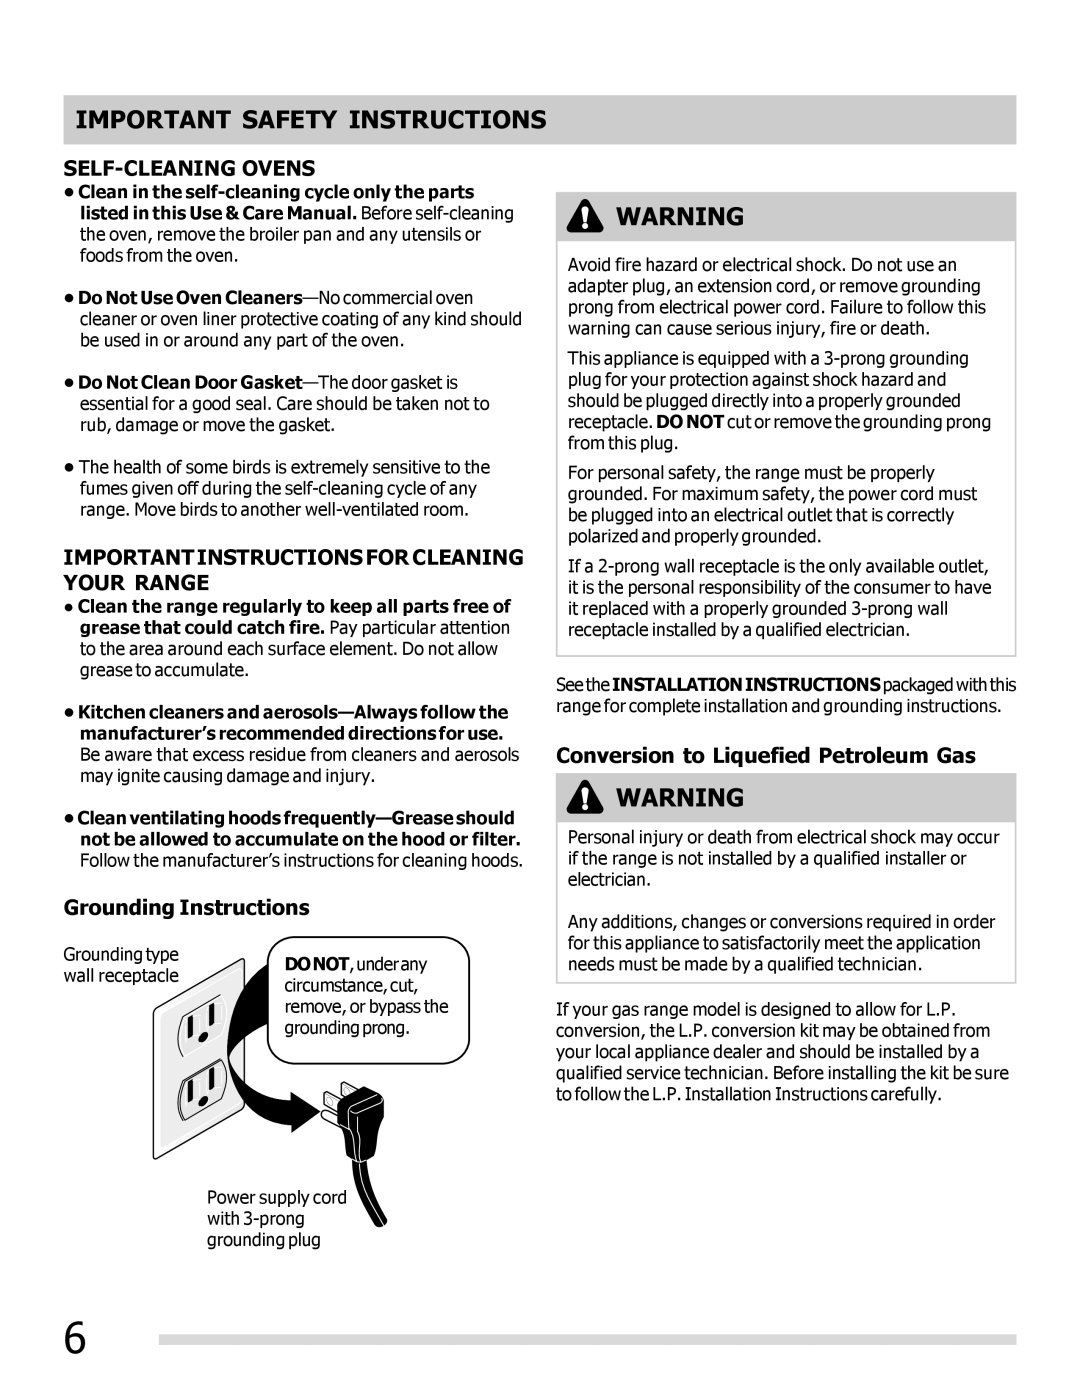 Frigidaire 316901202 manual Self-Cleaning Ovens, Important Instructions For Cleaning Your Range, Grounding Instructions 